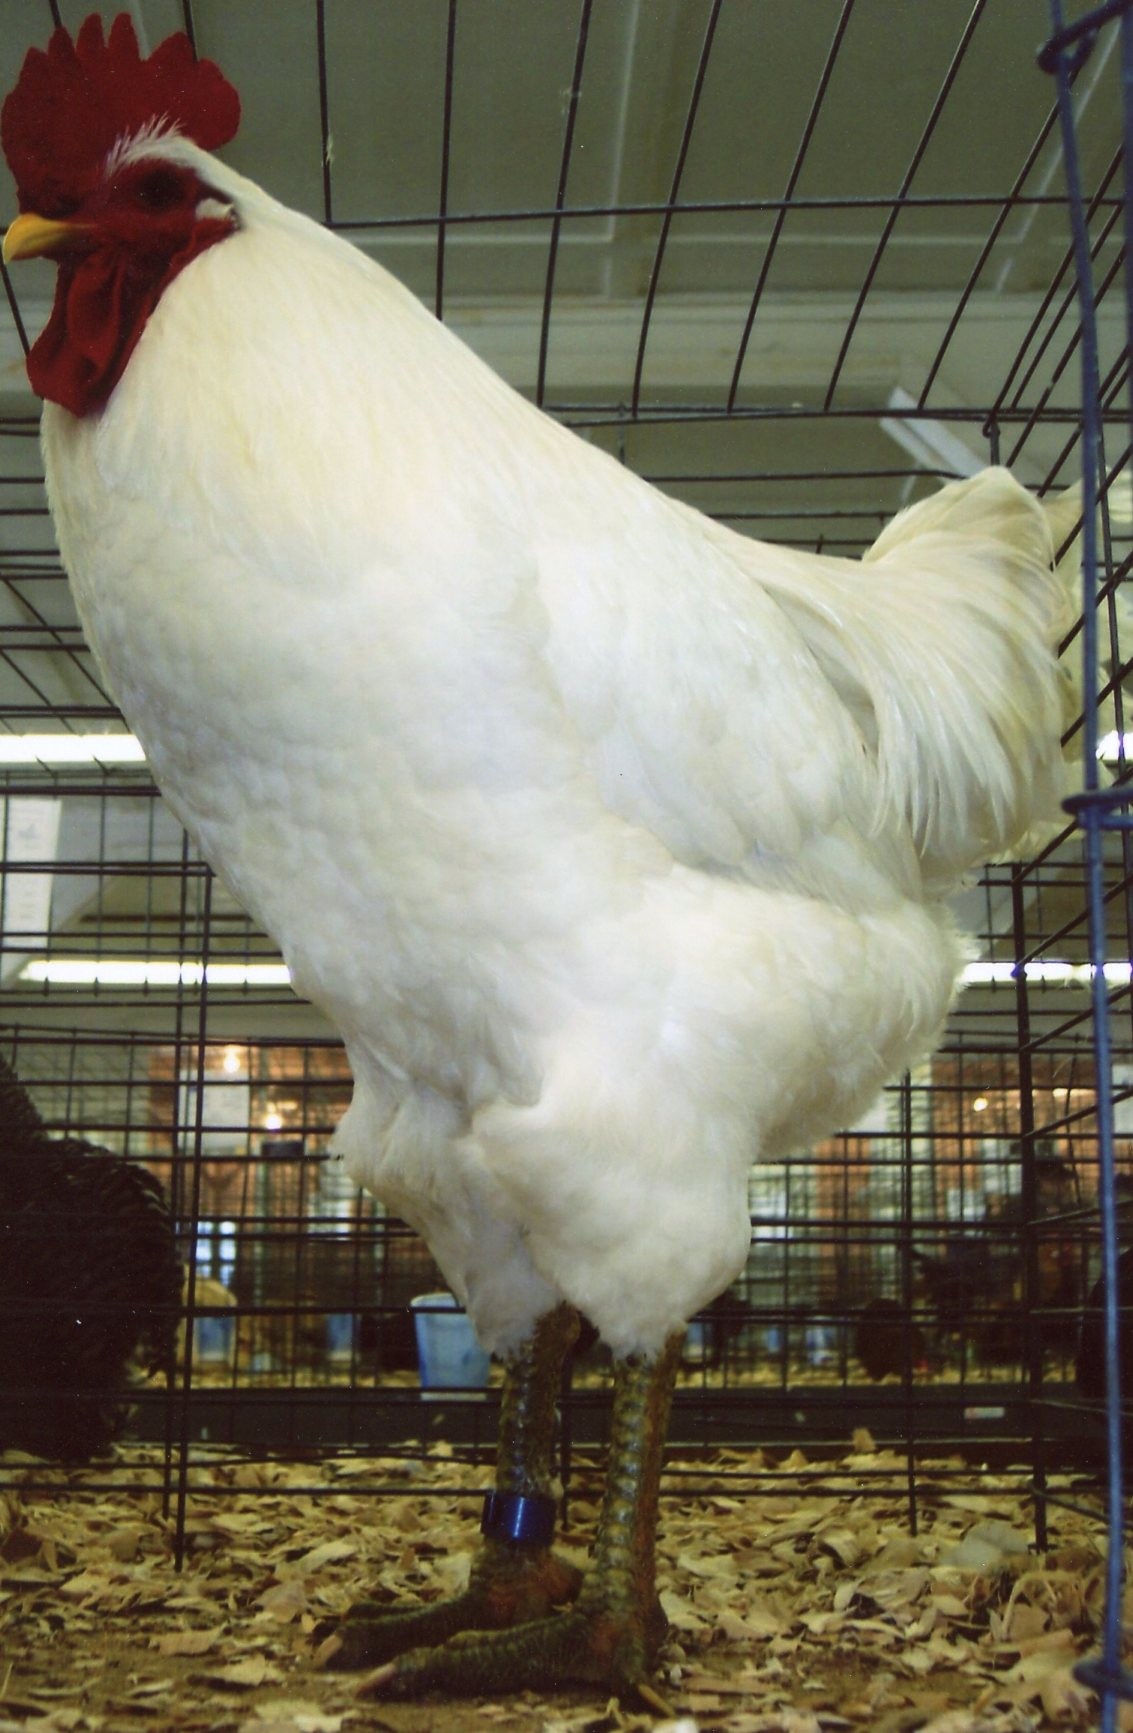 jersey giant chicken facts